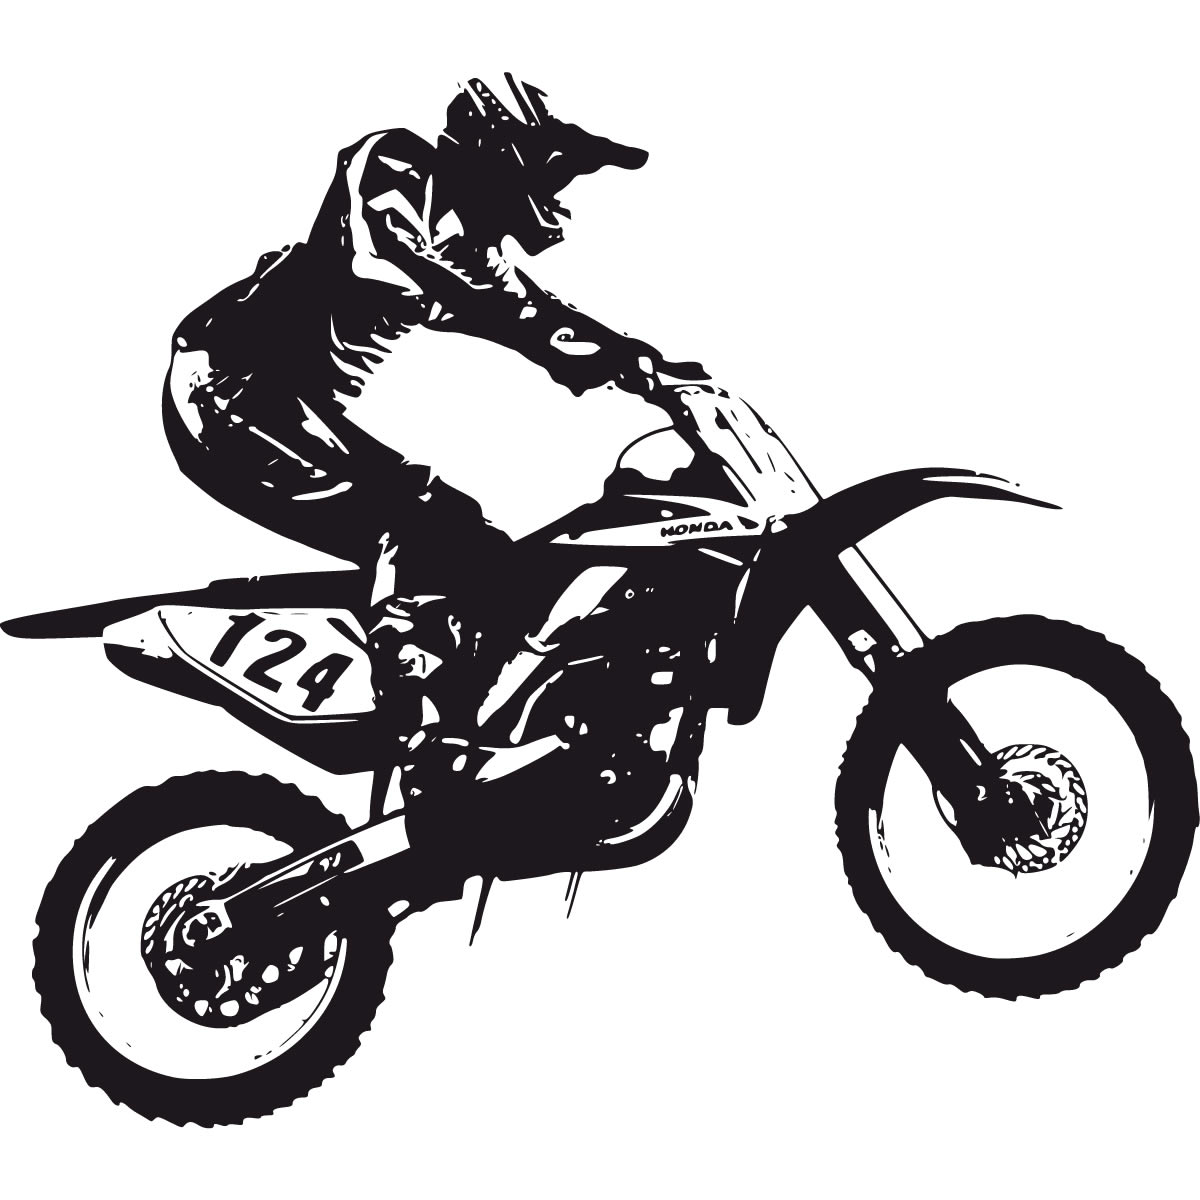 Clip Arts Related To : silhouette dirt bike clipart. 